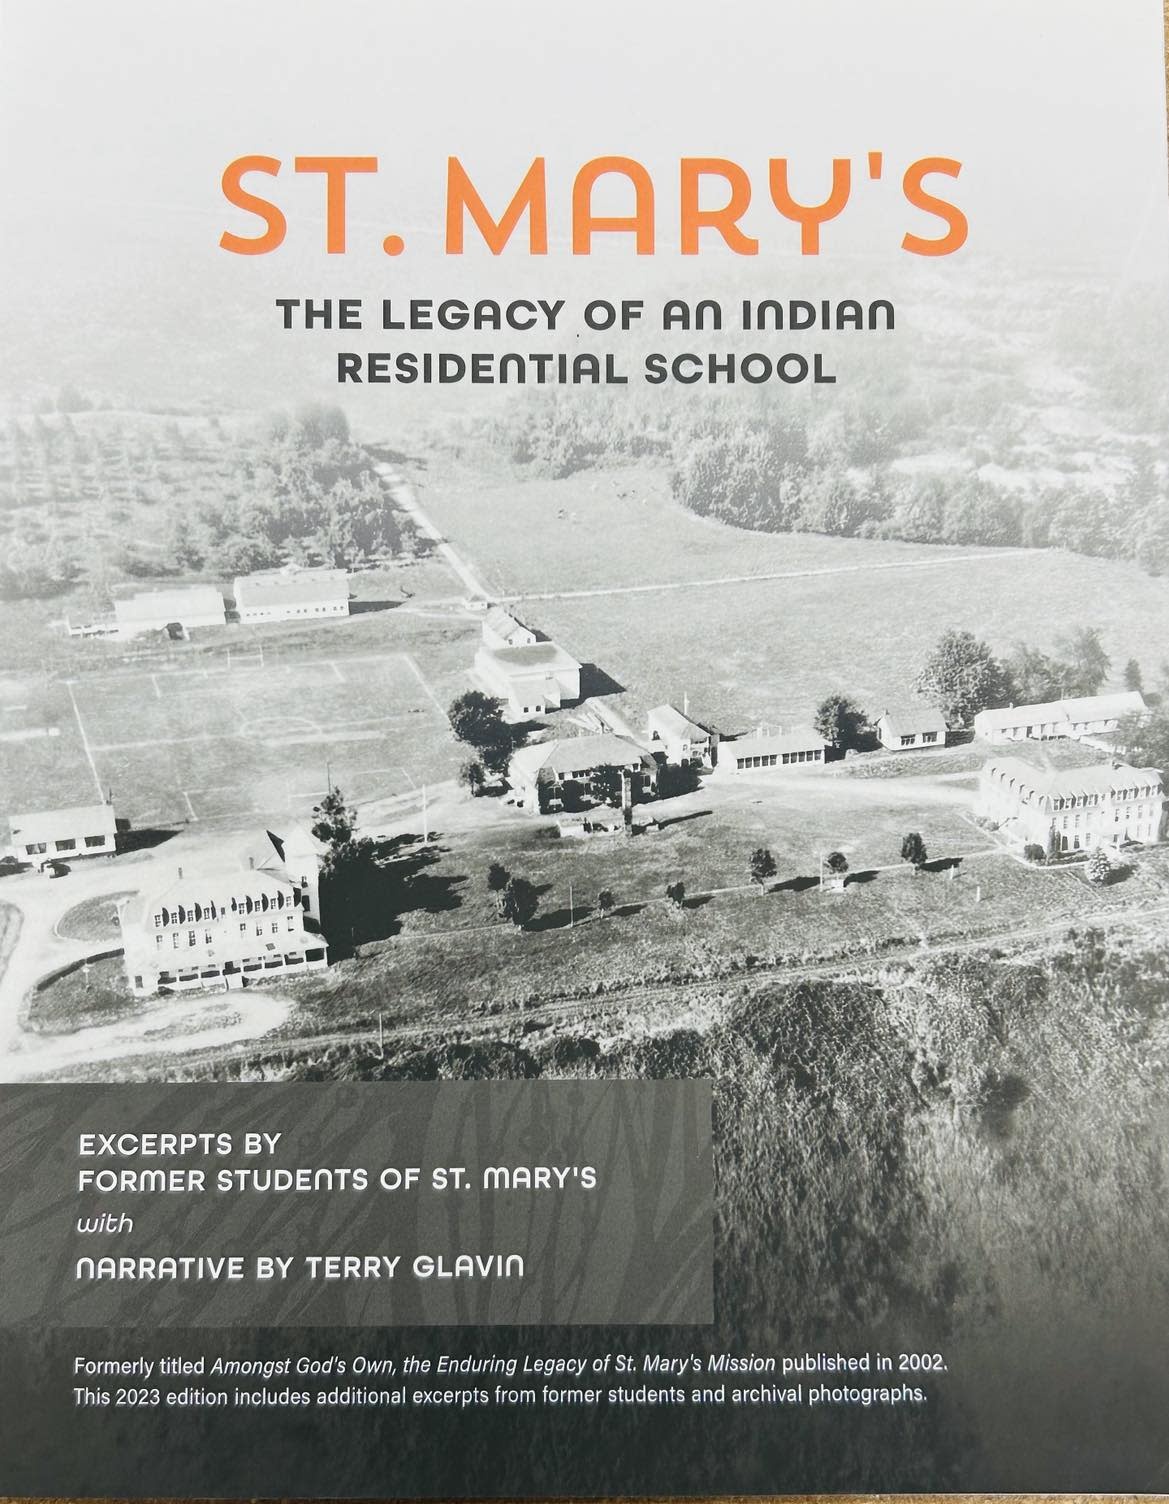 Book - St. Mary's the Legacy of an Indian Residential School-1